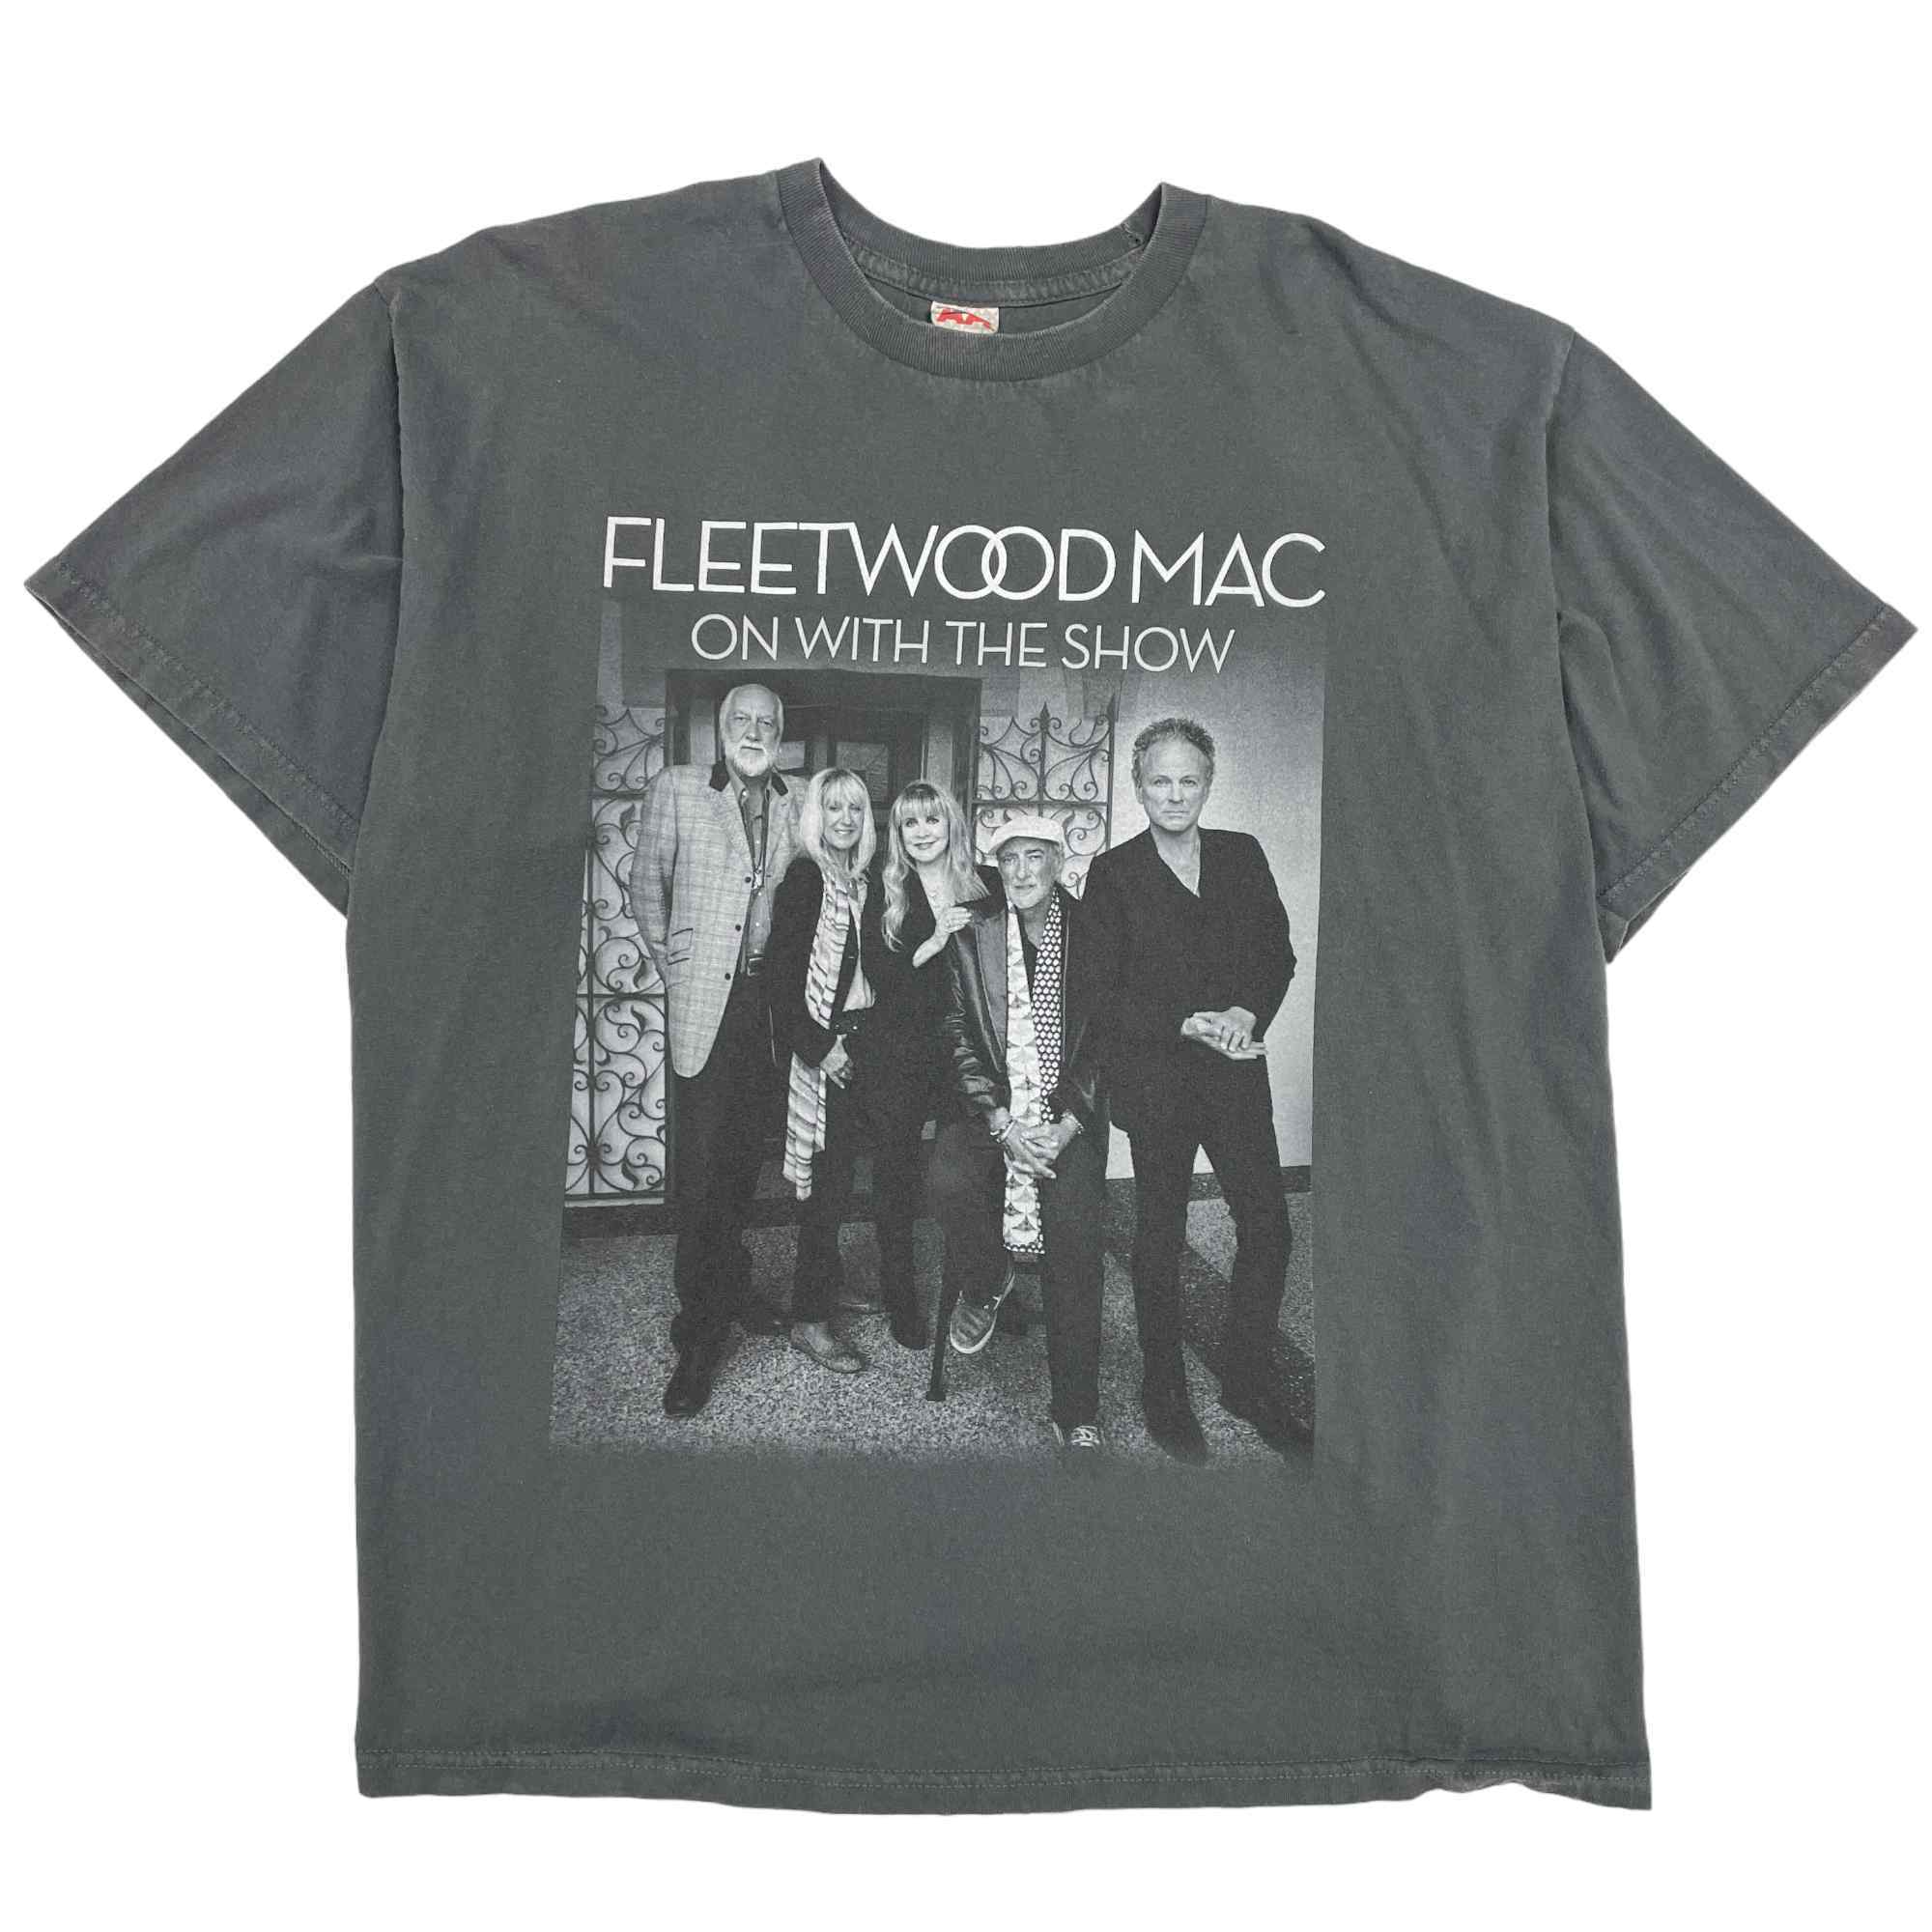 Fleetwood Mac 'On With The Show' Graphic T-Shirt - XL